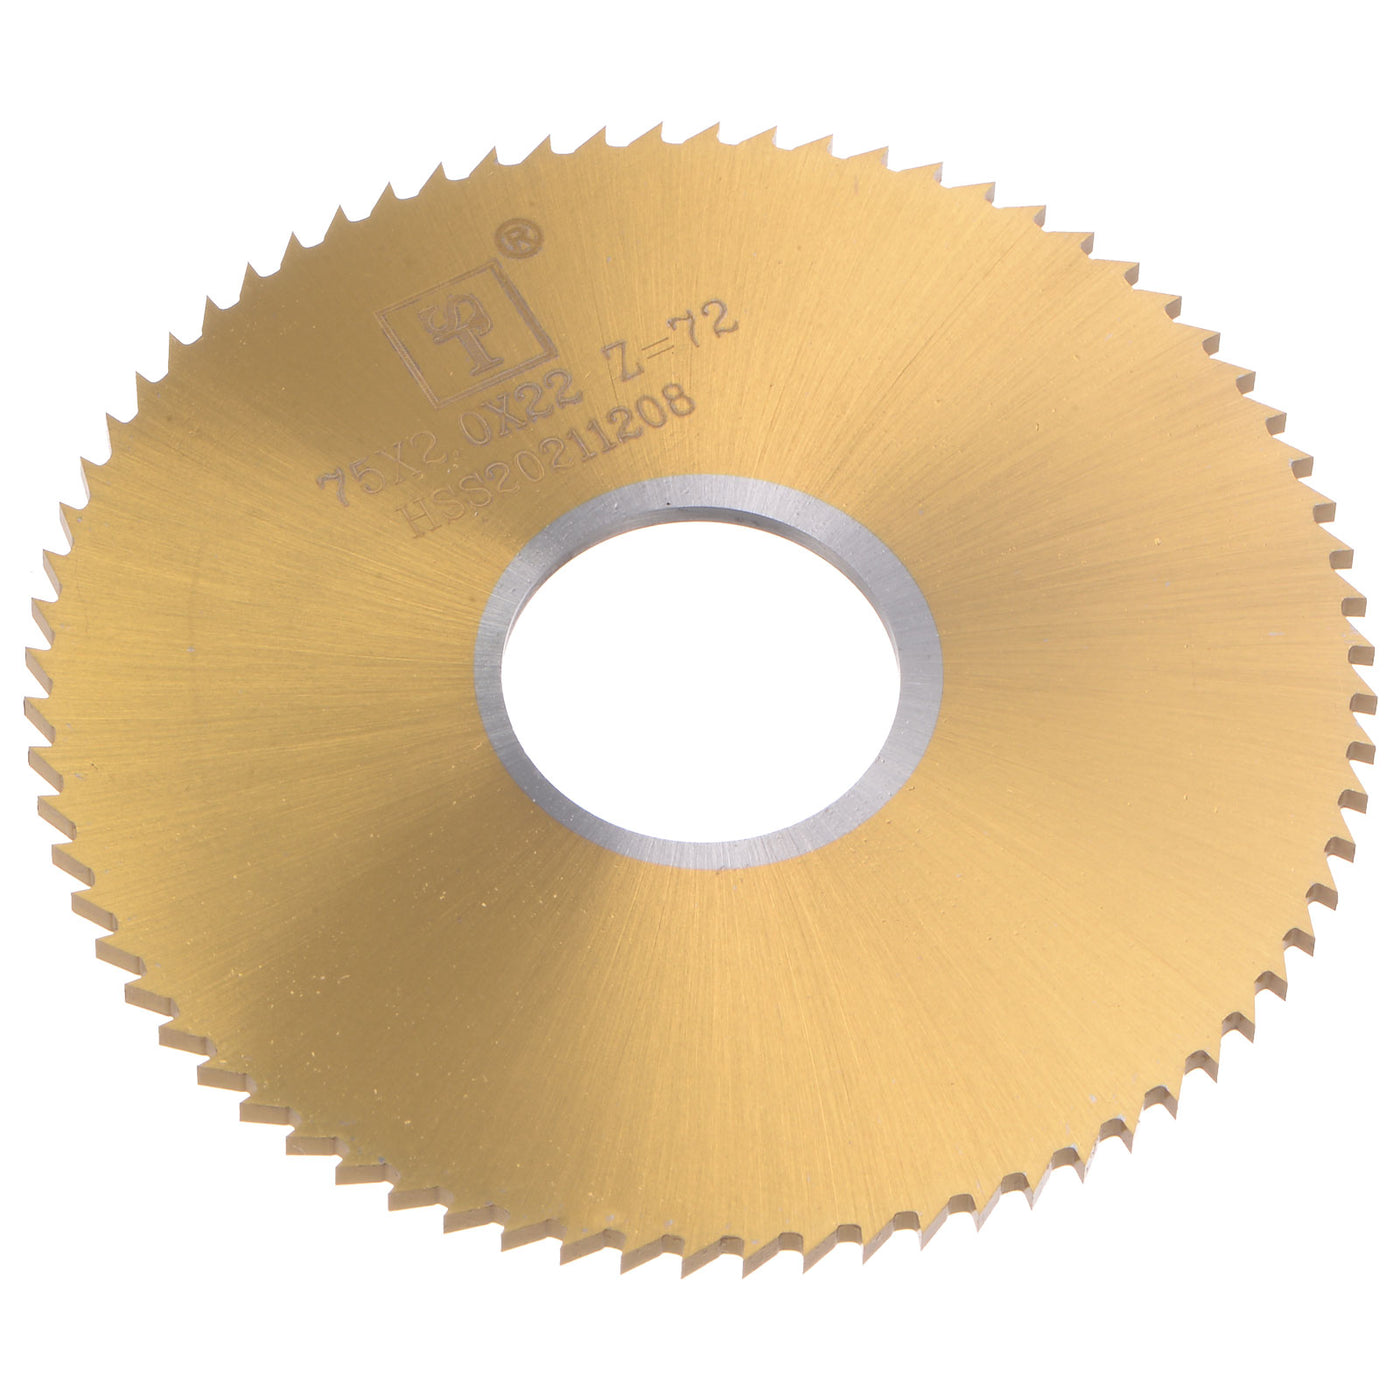 Uxcell Uxcell 75mm Dia 22mm Arbor 1.2mm Thick 72 Tooth Titanium Coated Circular Saw Blade